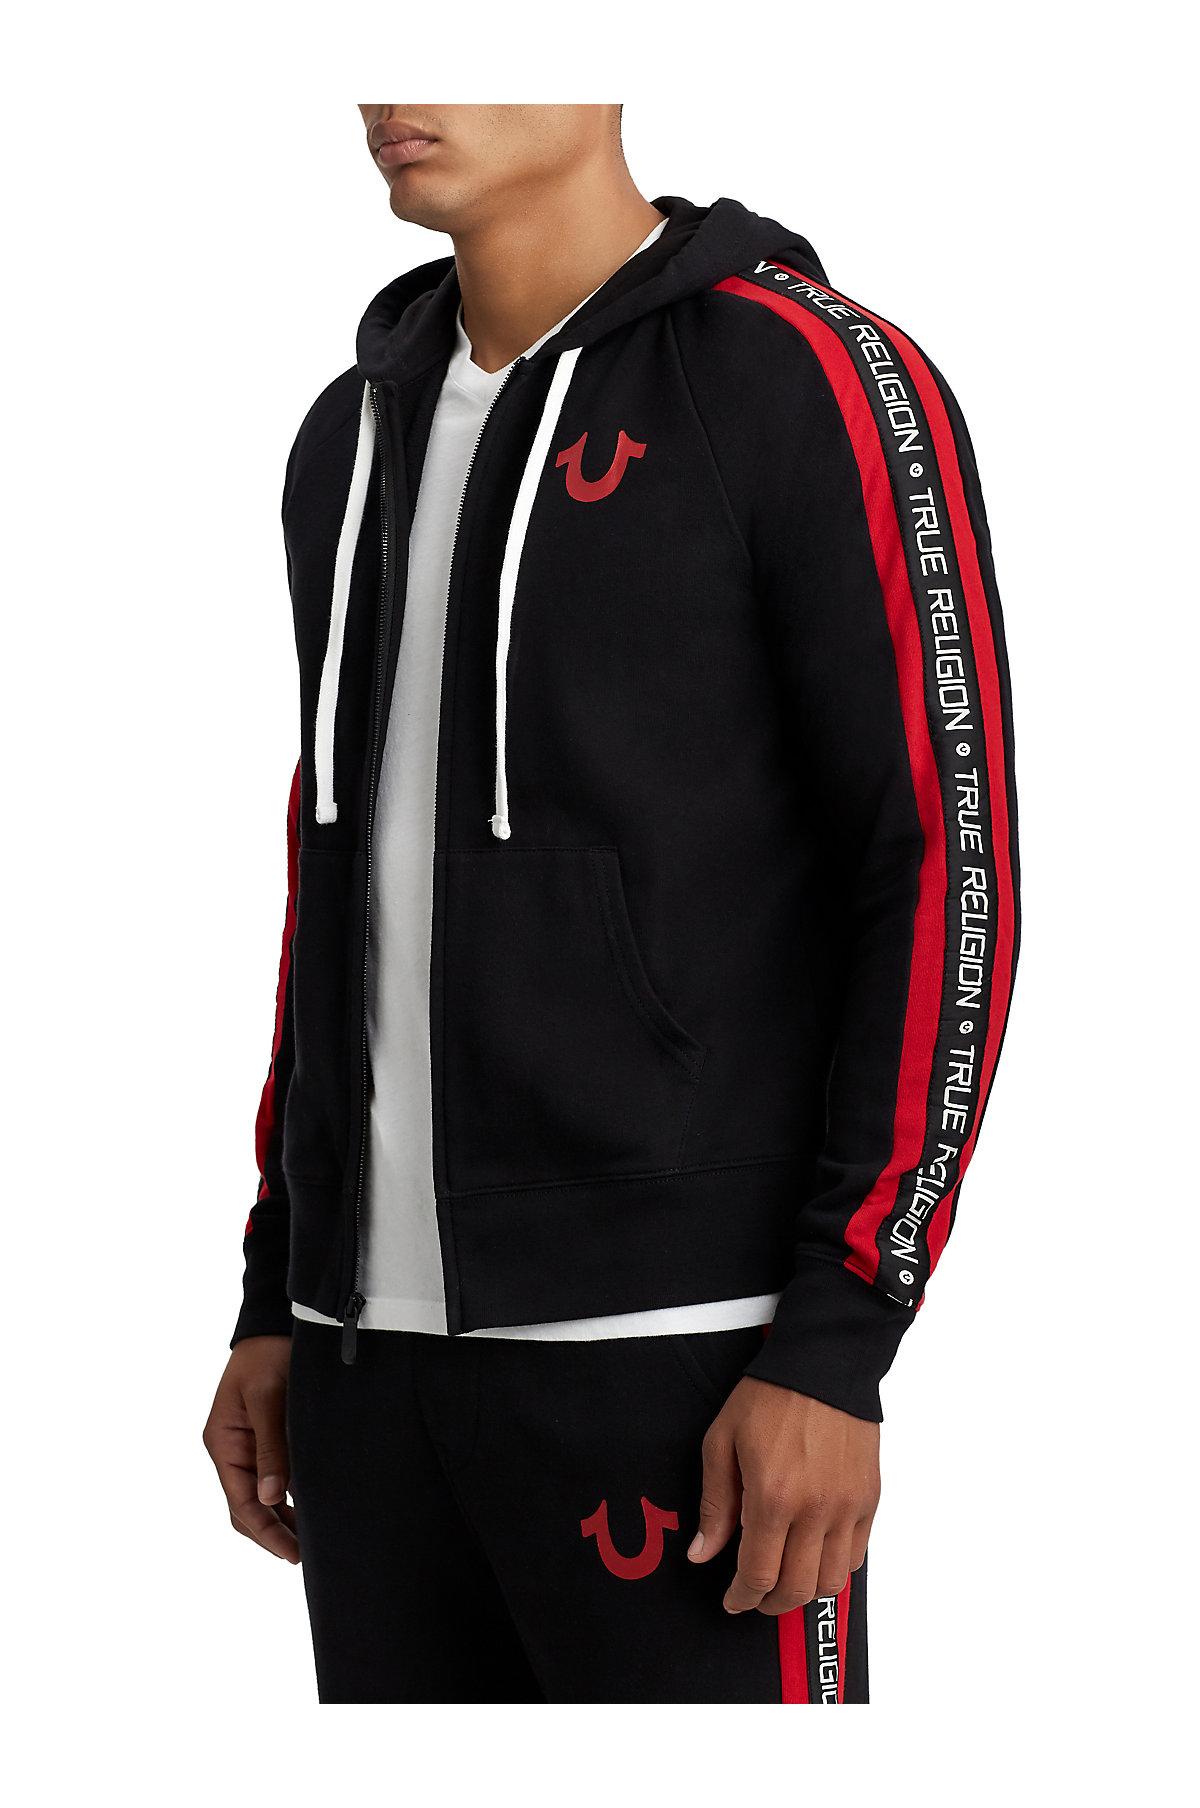 red and black true religion hoodie